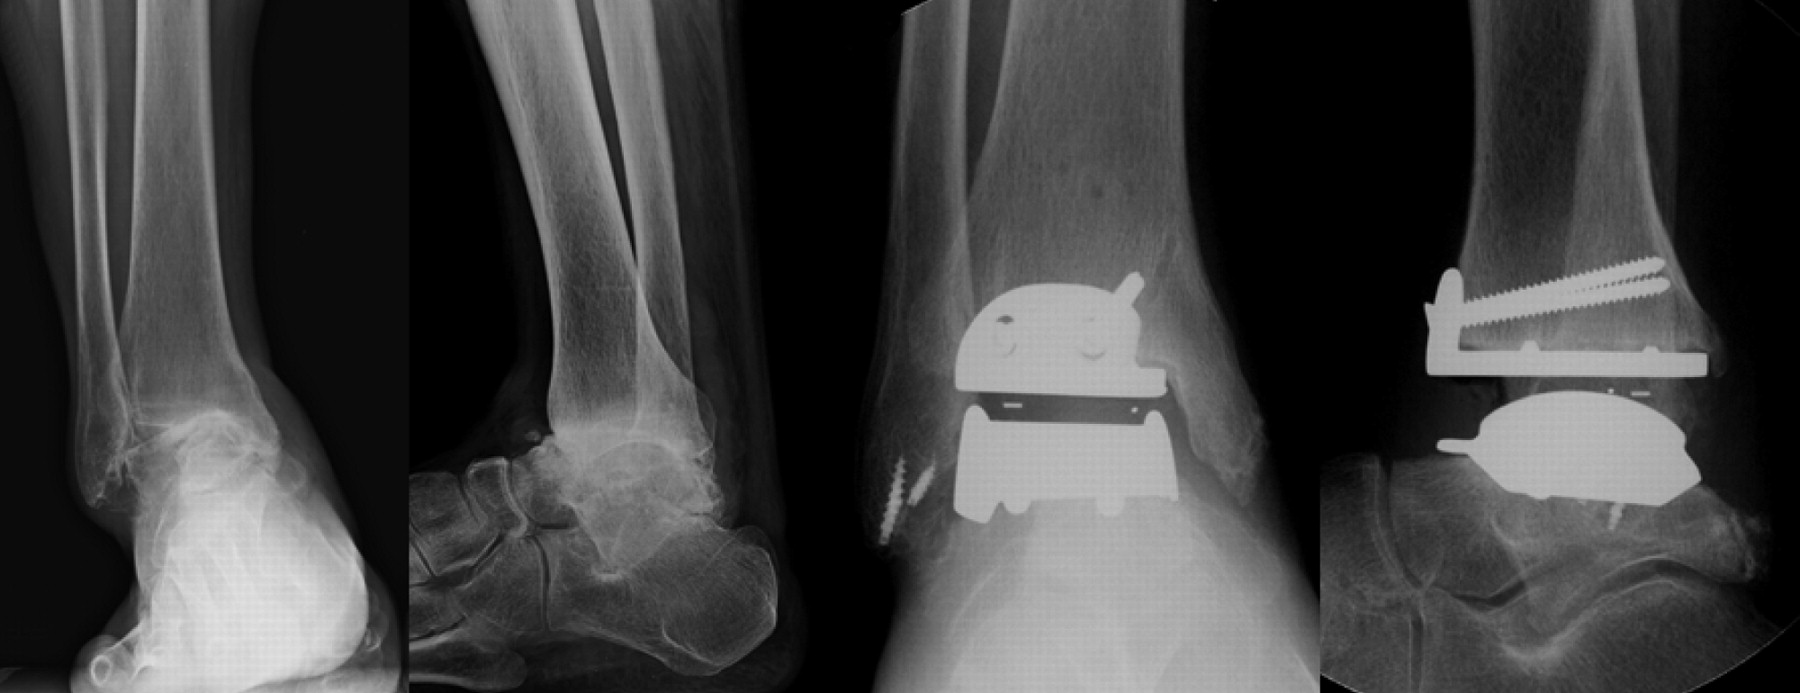 Total Ankle Replacement In Moderate To Severe Varus Deformity Of The Ankle Bone Joint